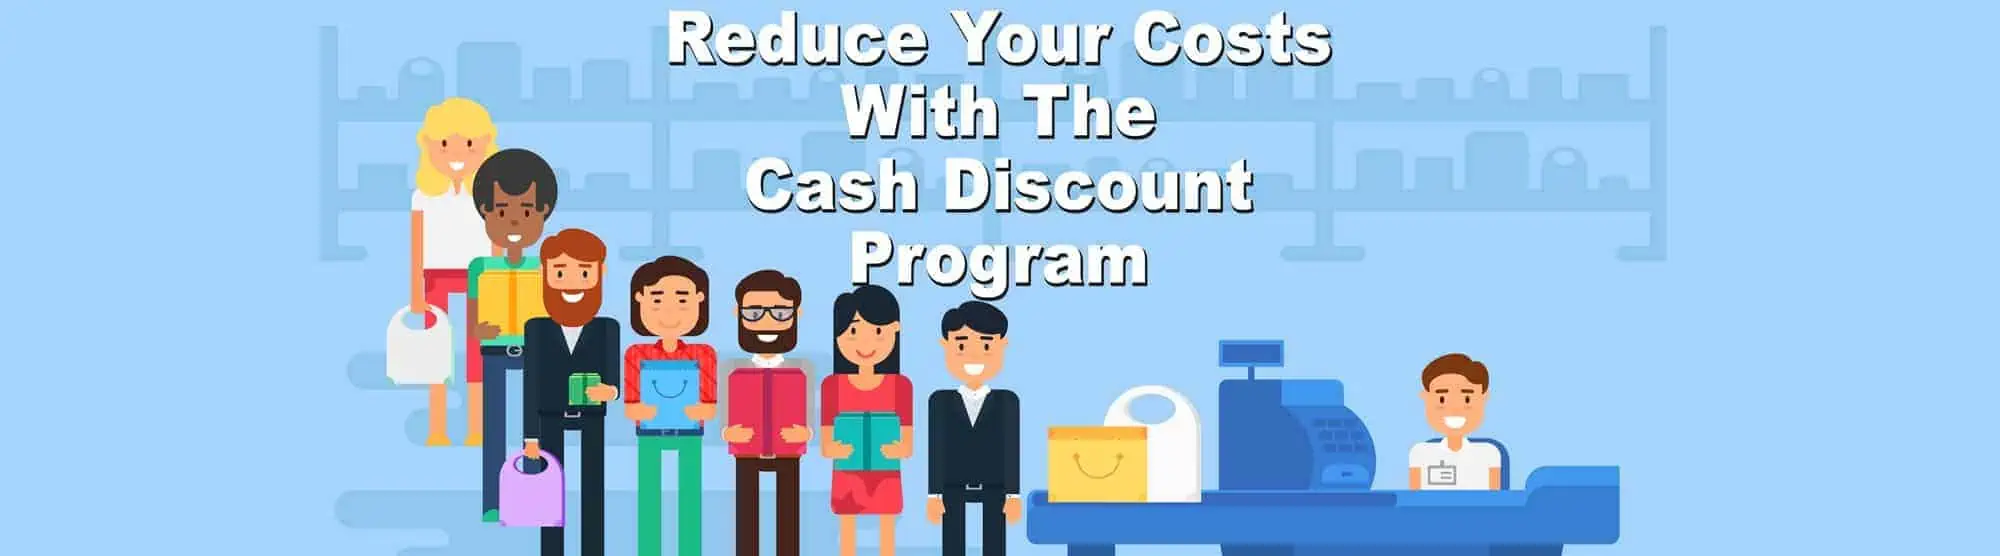 reduce merchant services costs with cash discount program